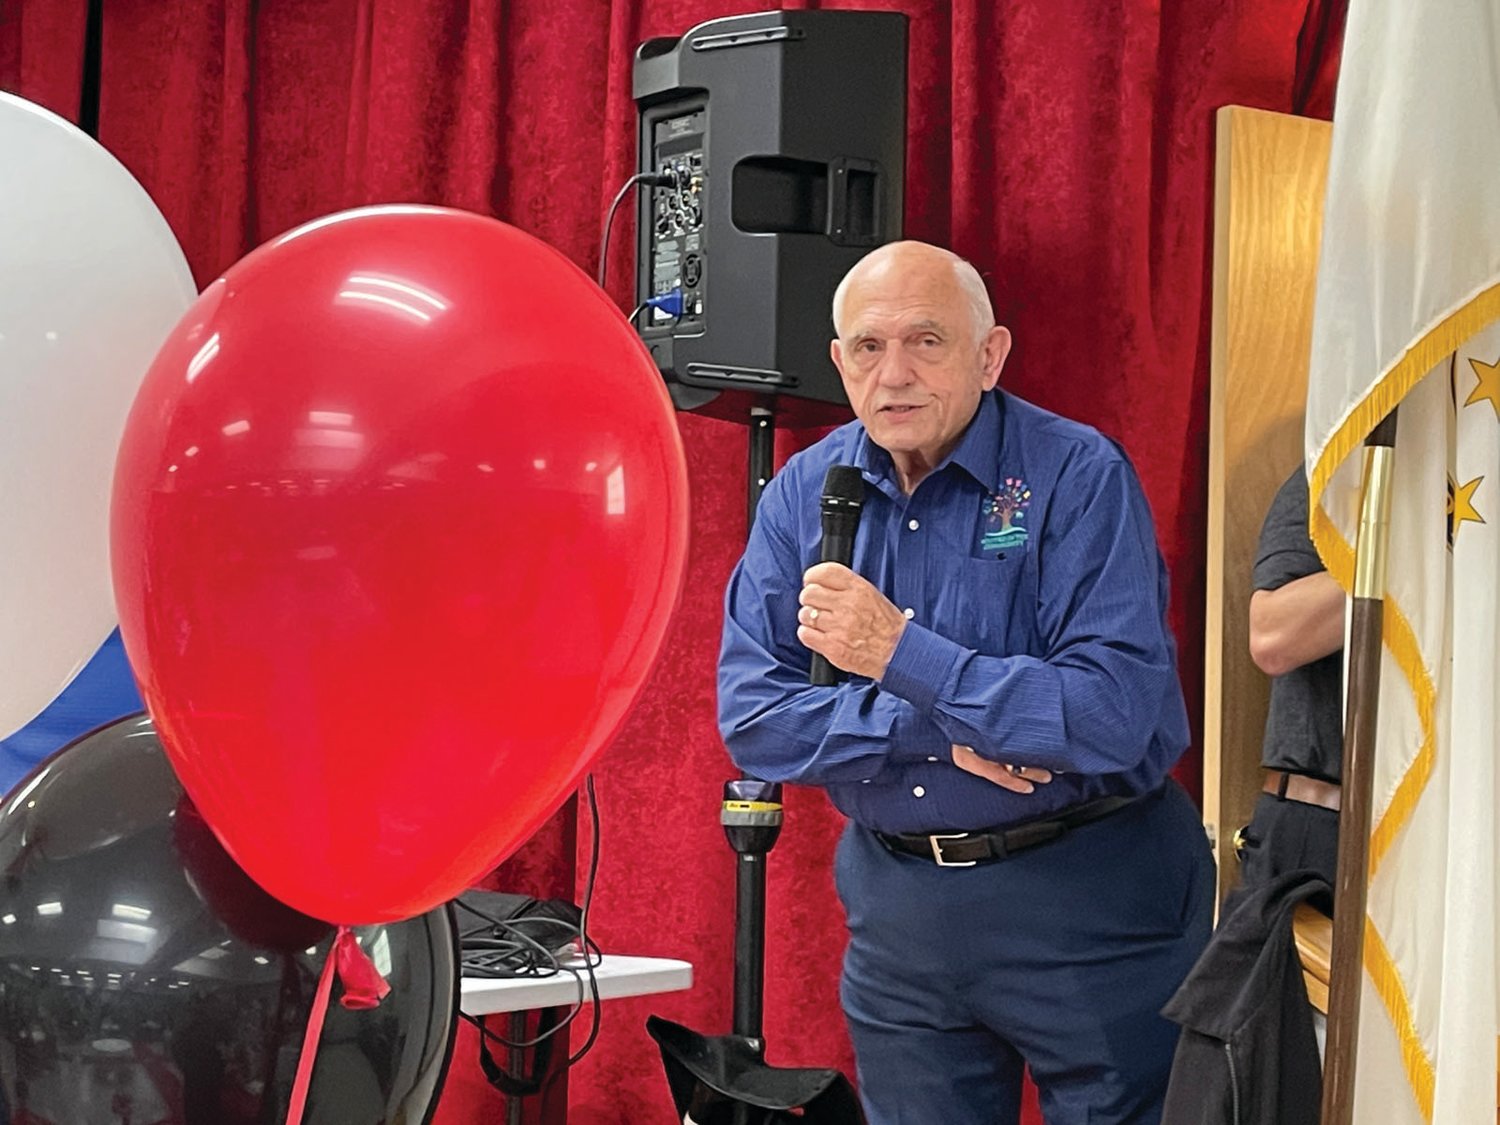 MESSAGE FROM THE CHIEF: Ken Mancusco, former chief of the Cranston Police Department, addresses those on hand for Tuesday’s reopening event at the Cranston Senior Enrichment Center.